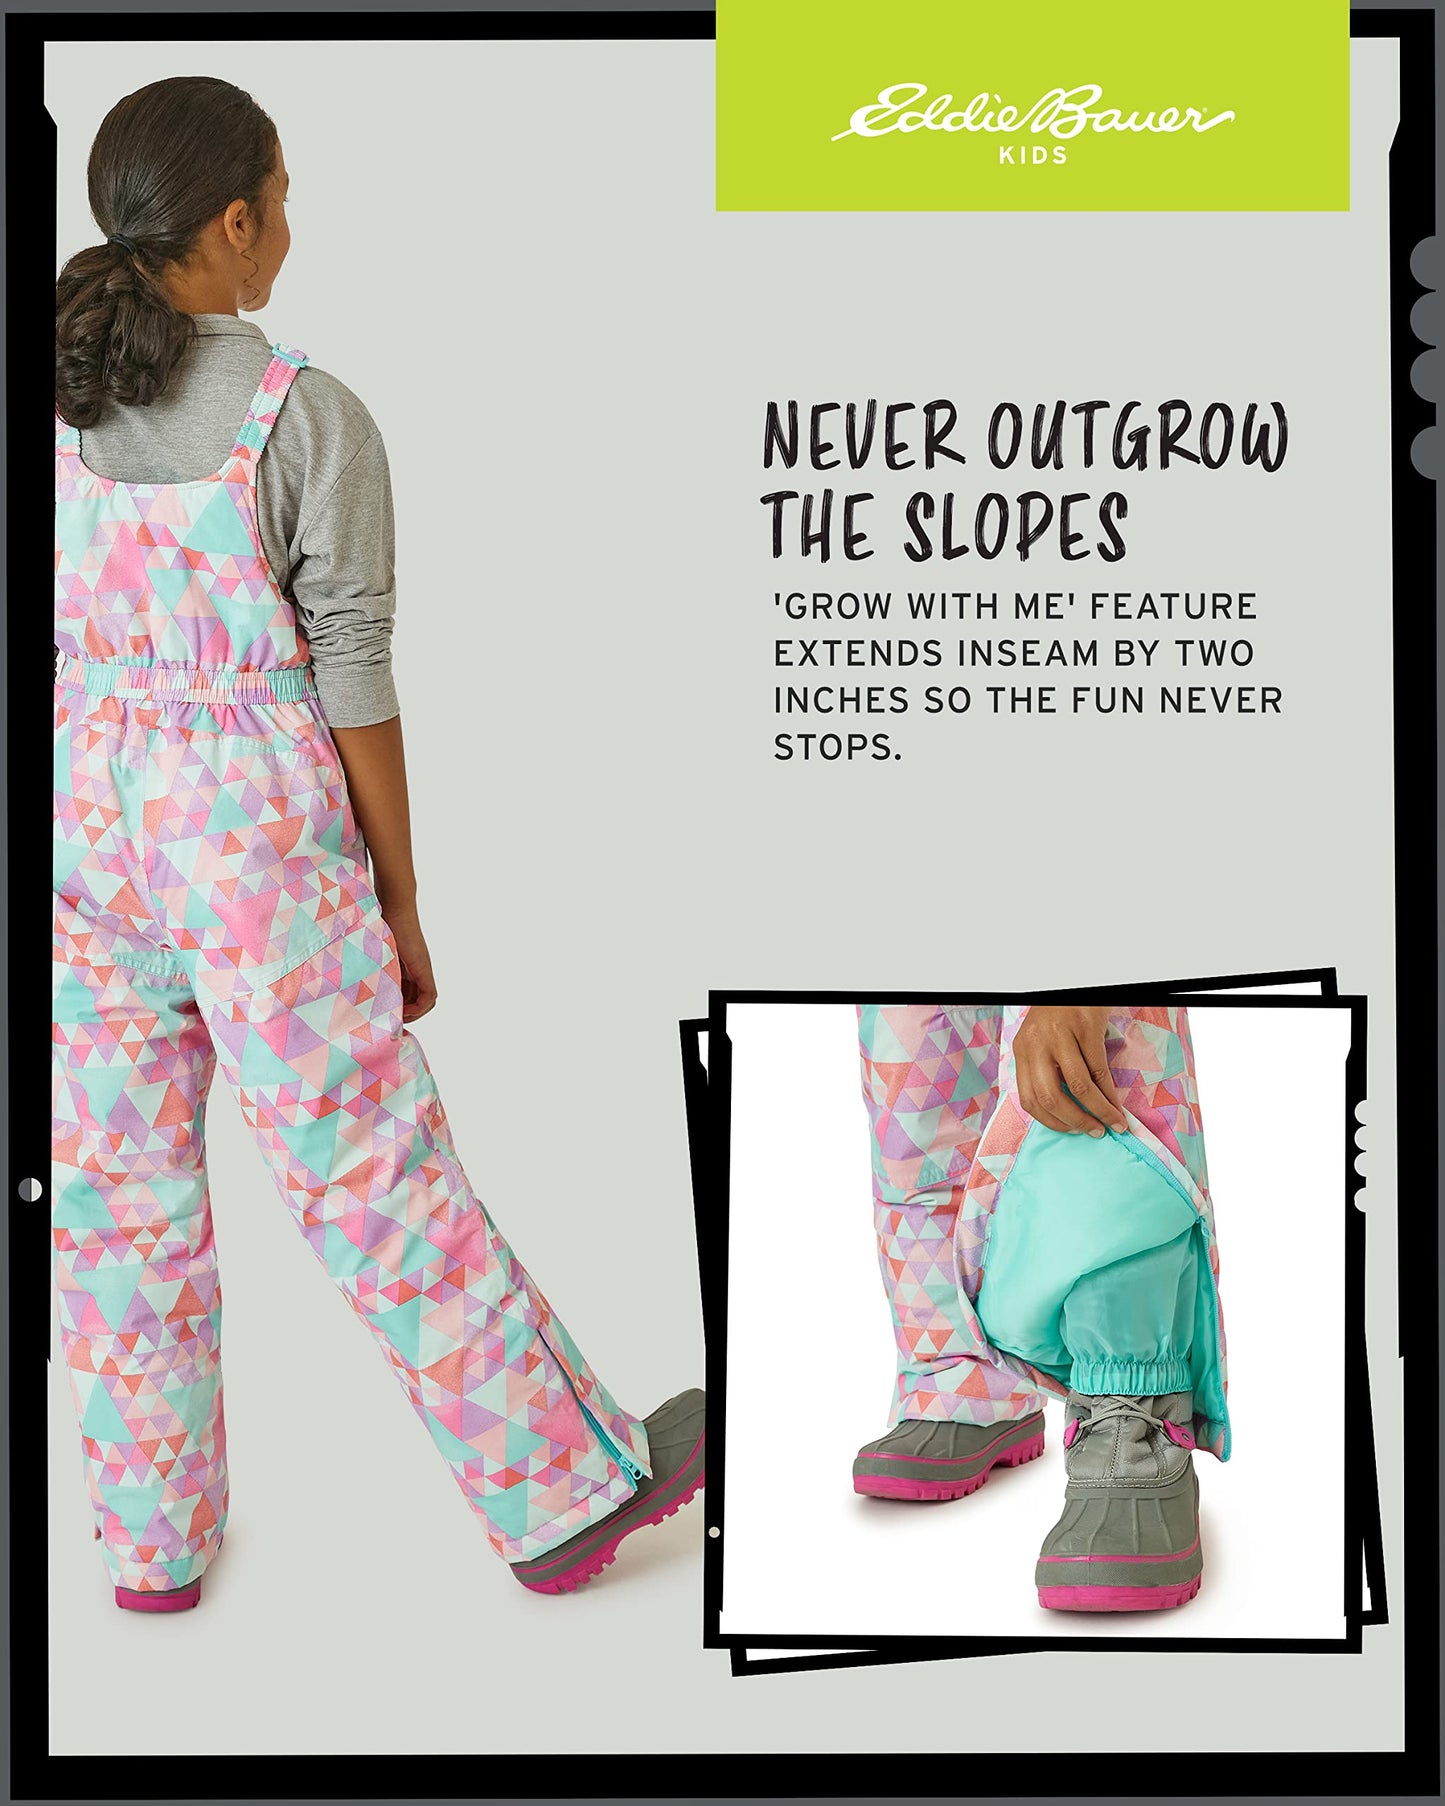 Eddie Bauer Kids' Snow Bib - Insulated Waterproof Snow Ski Pant Overalls For Boys And Girls Size 3-4